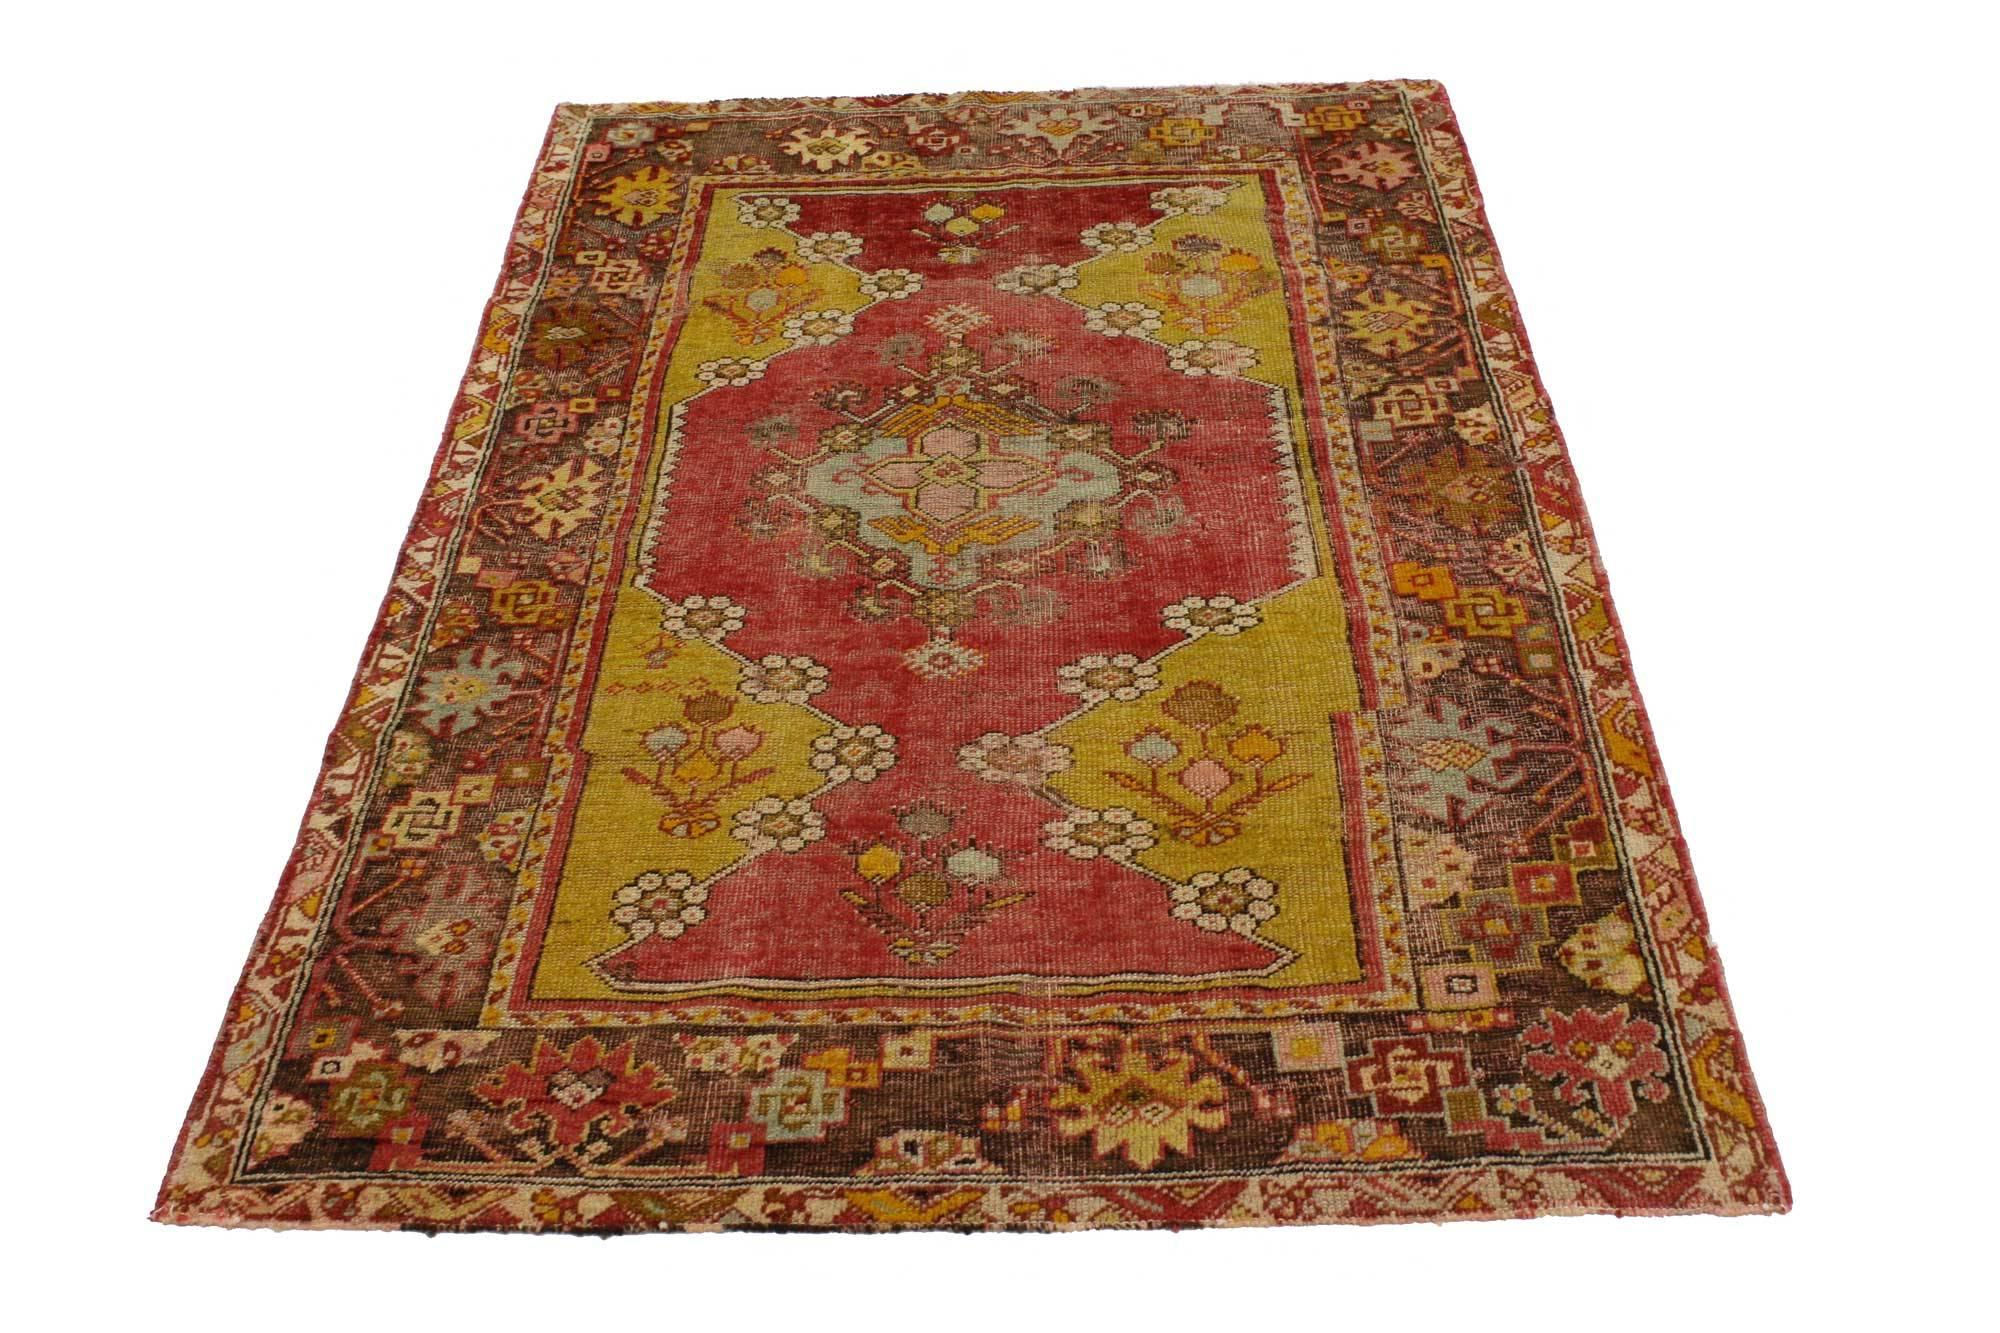 51685, vintage Turkish Oushak accent rug, entry or foyer rug. This vintage Turkish Oushak rug features a modern traditional style. Immersed in Anatolian history and refined colors, this vintage Oushak rug combines simplicity with sophistication.